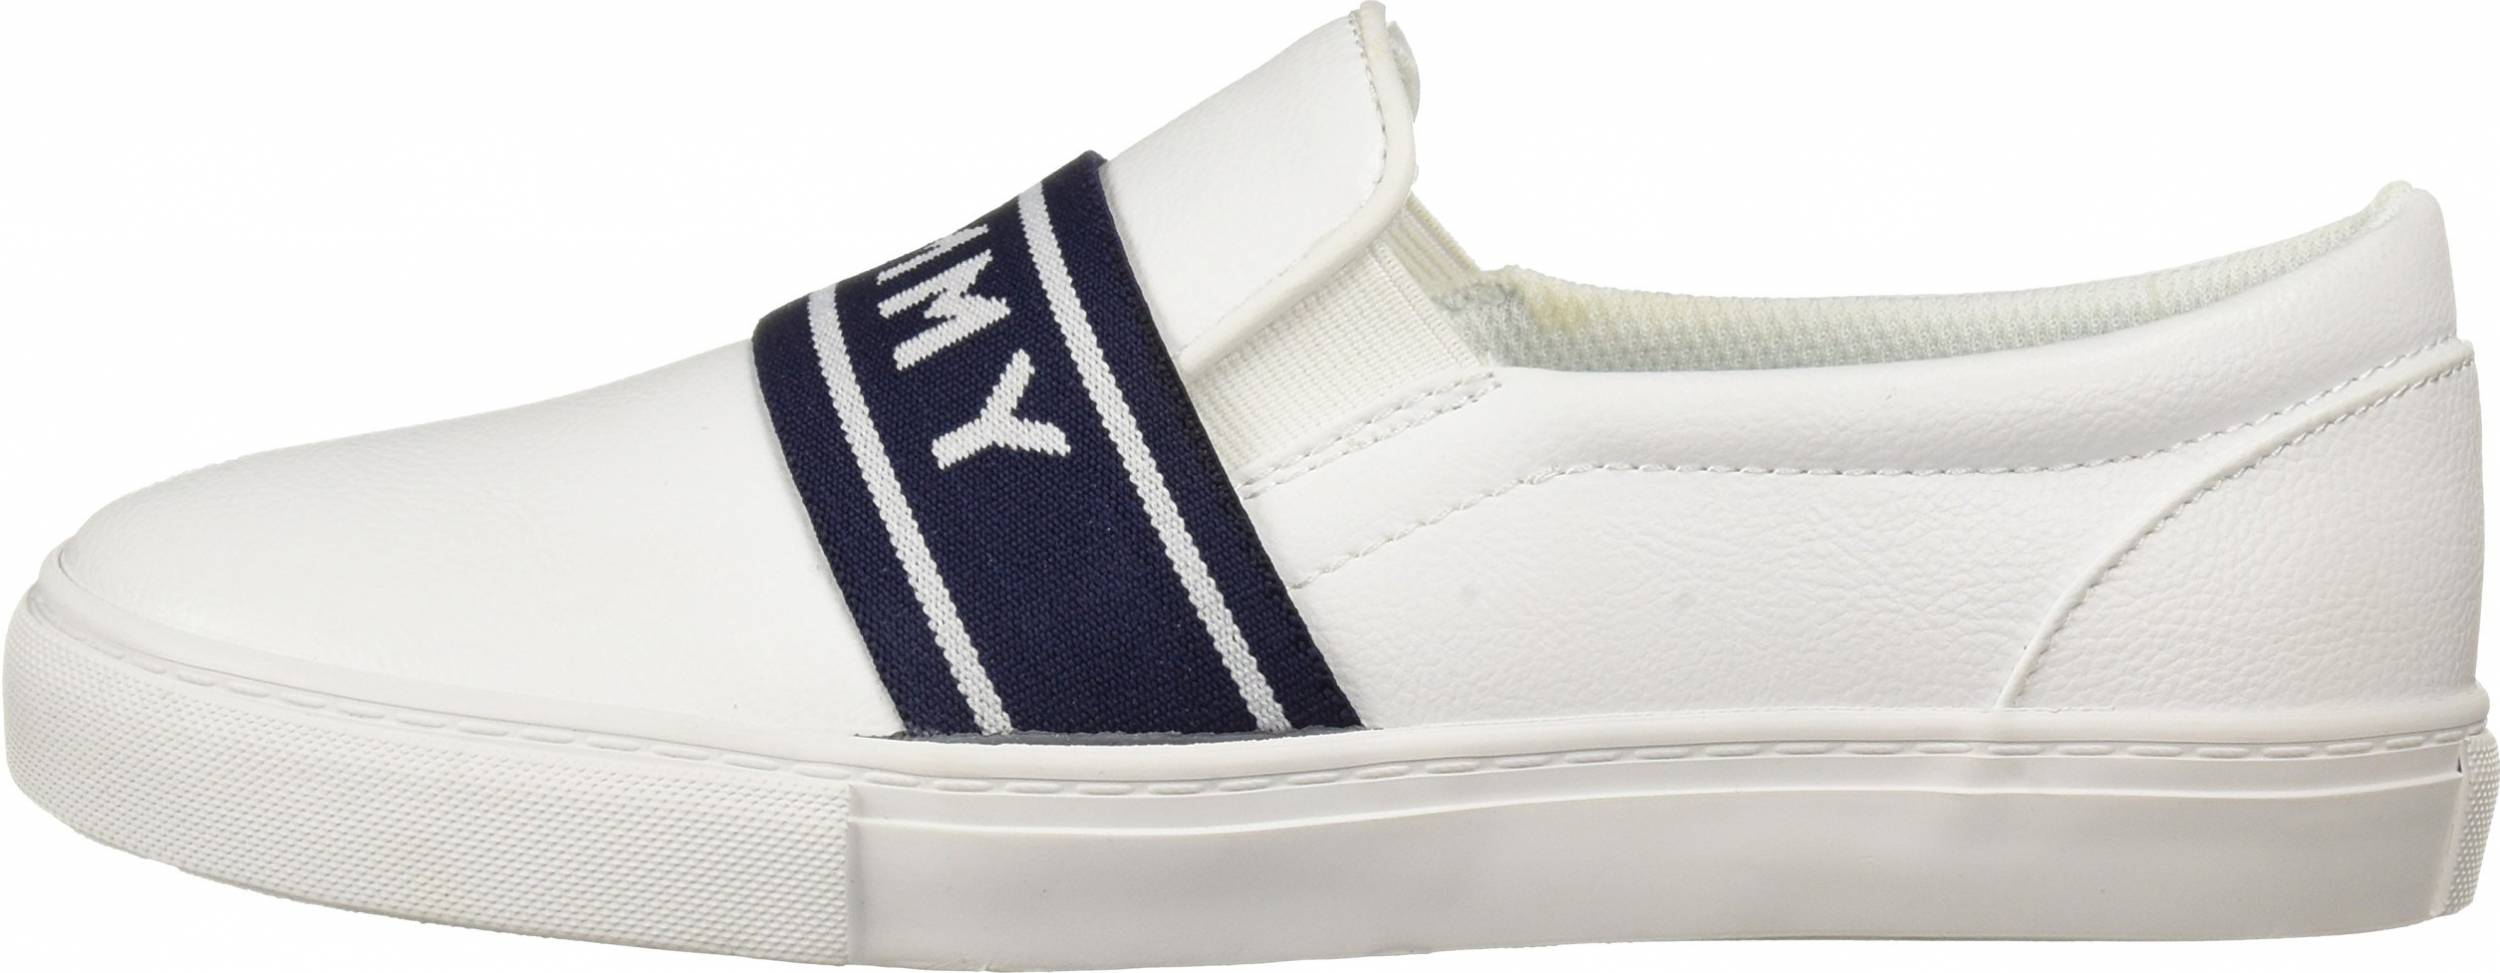 drop Yeah Really Slip On Tommy Hilfiger Women's Clearance, SAVE 40% - aveclumiere.com